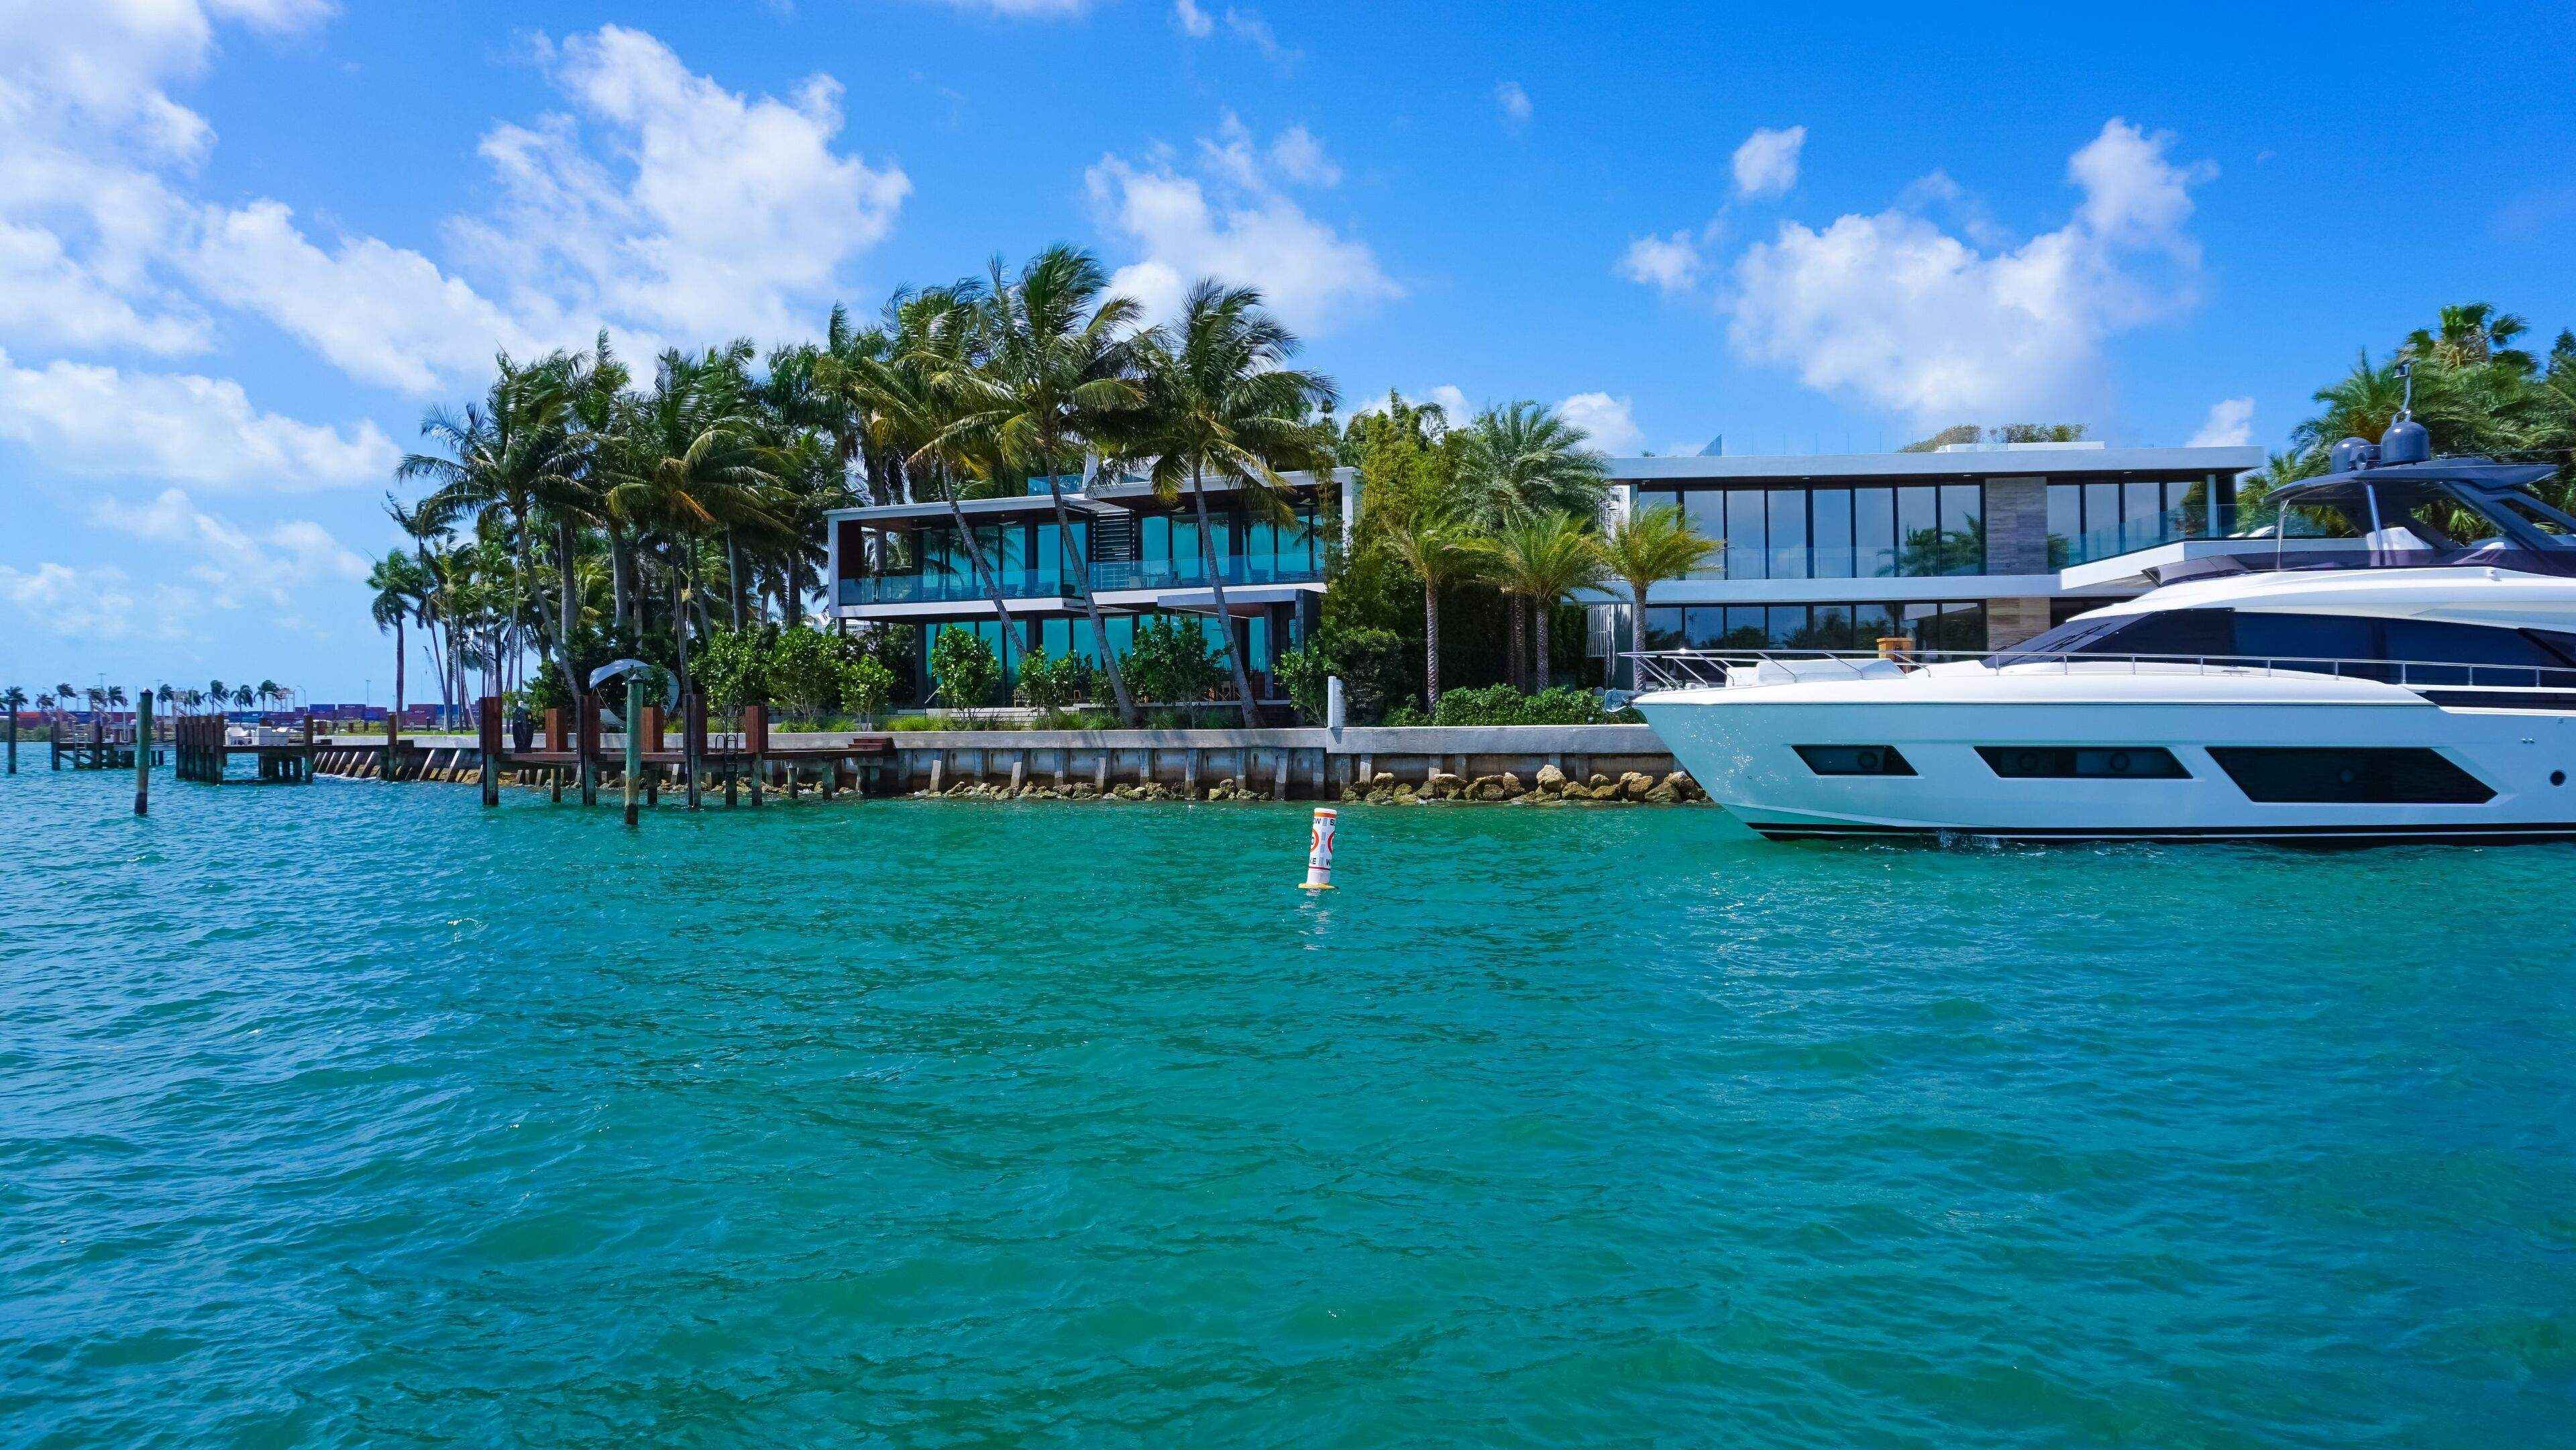 yatch-parked-on-luxury-house